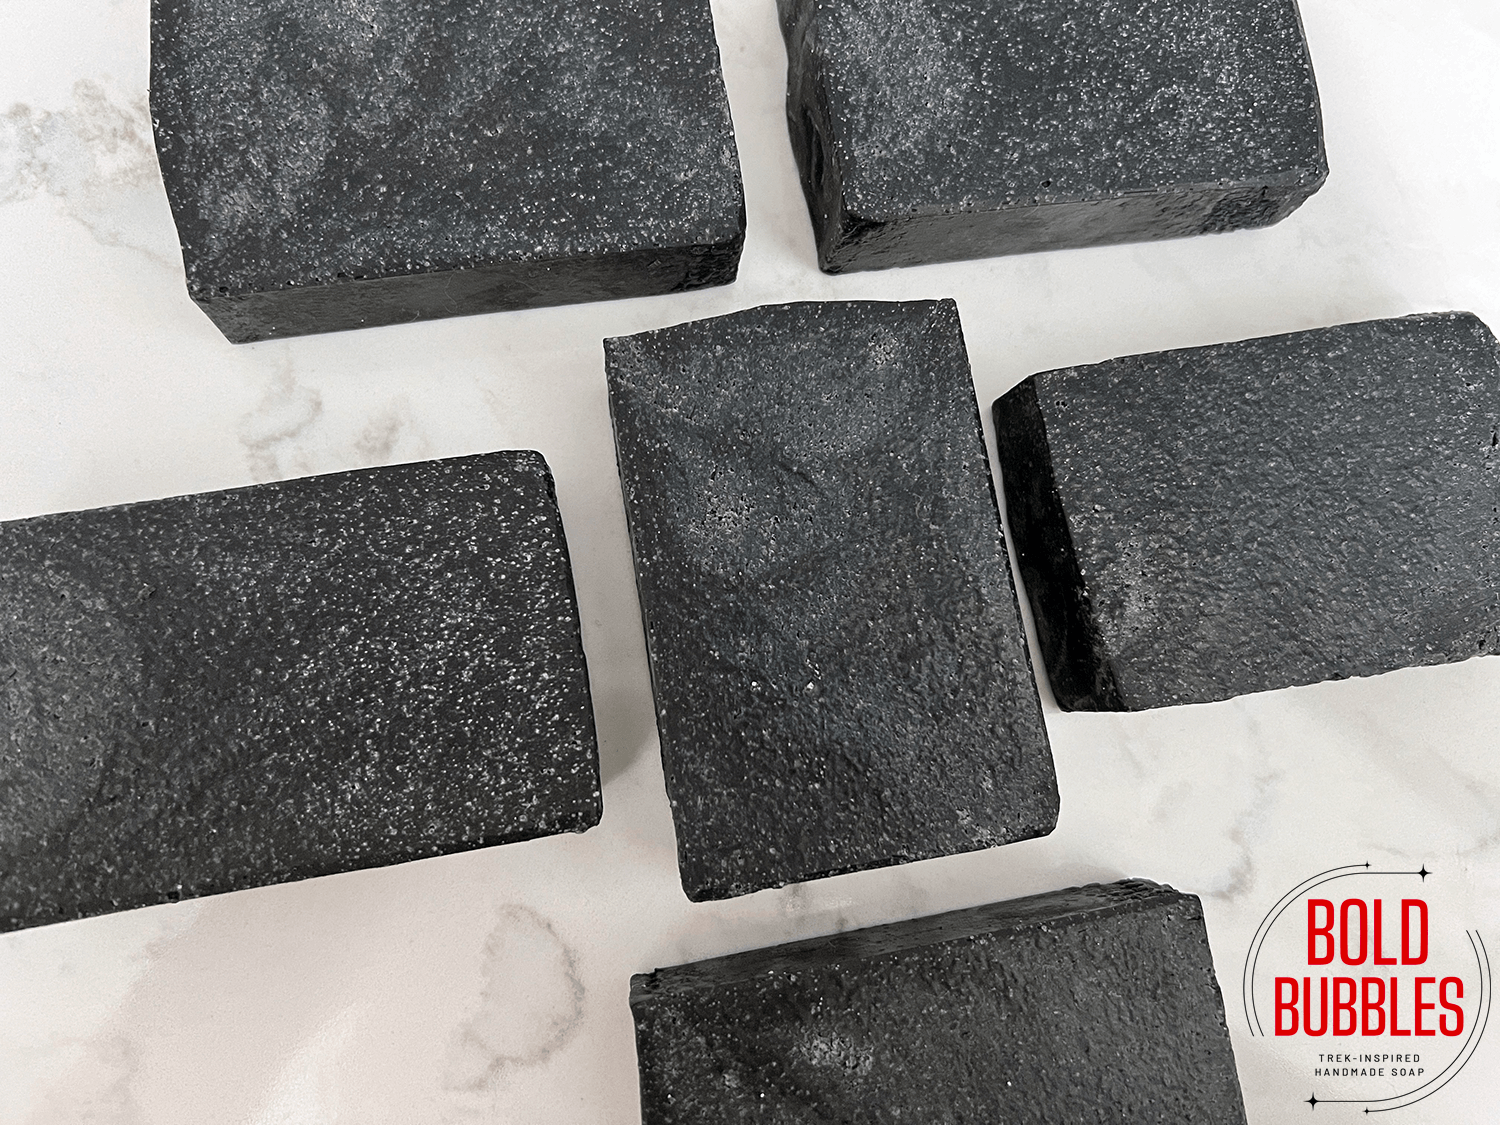 A luxurious salt bar colored with activated charcoal. Its appearance is inspired by Armus, the character that killed Tasha Yar in Star Trek: The Next Generation.